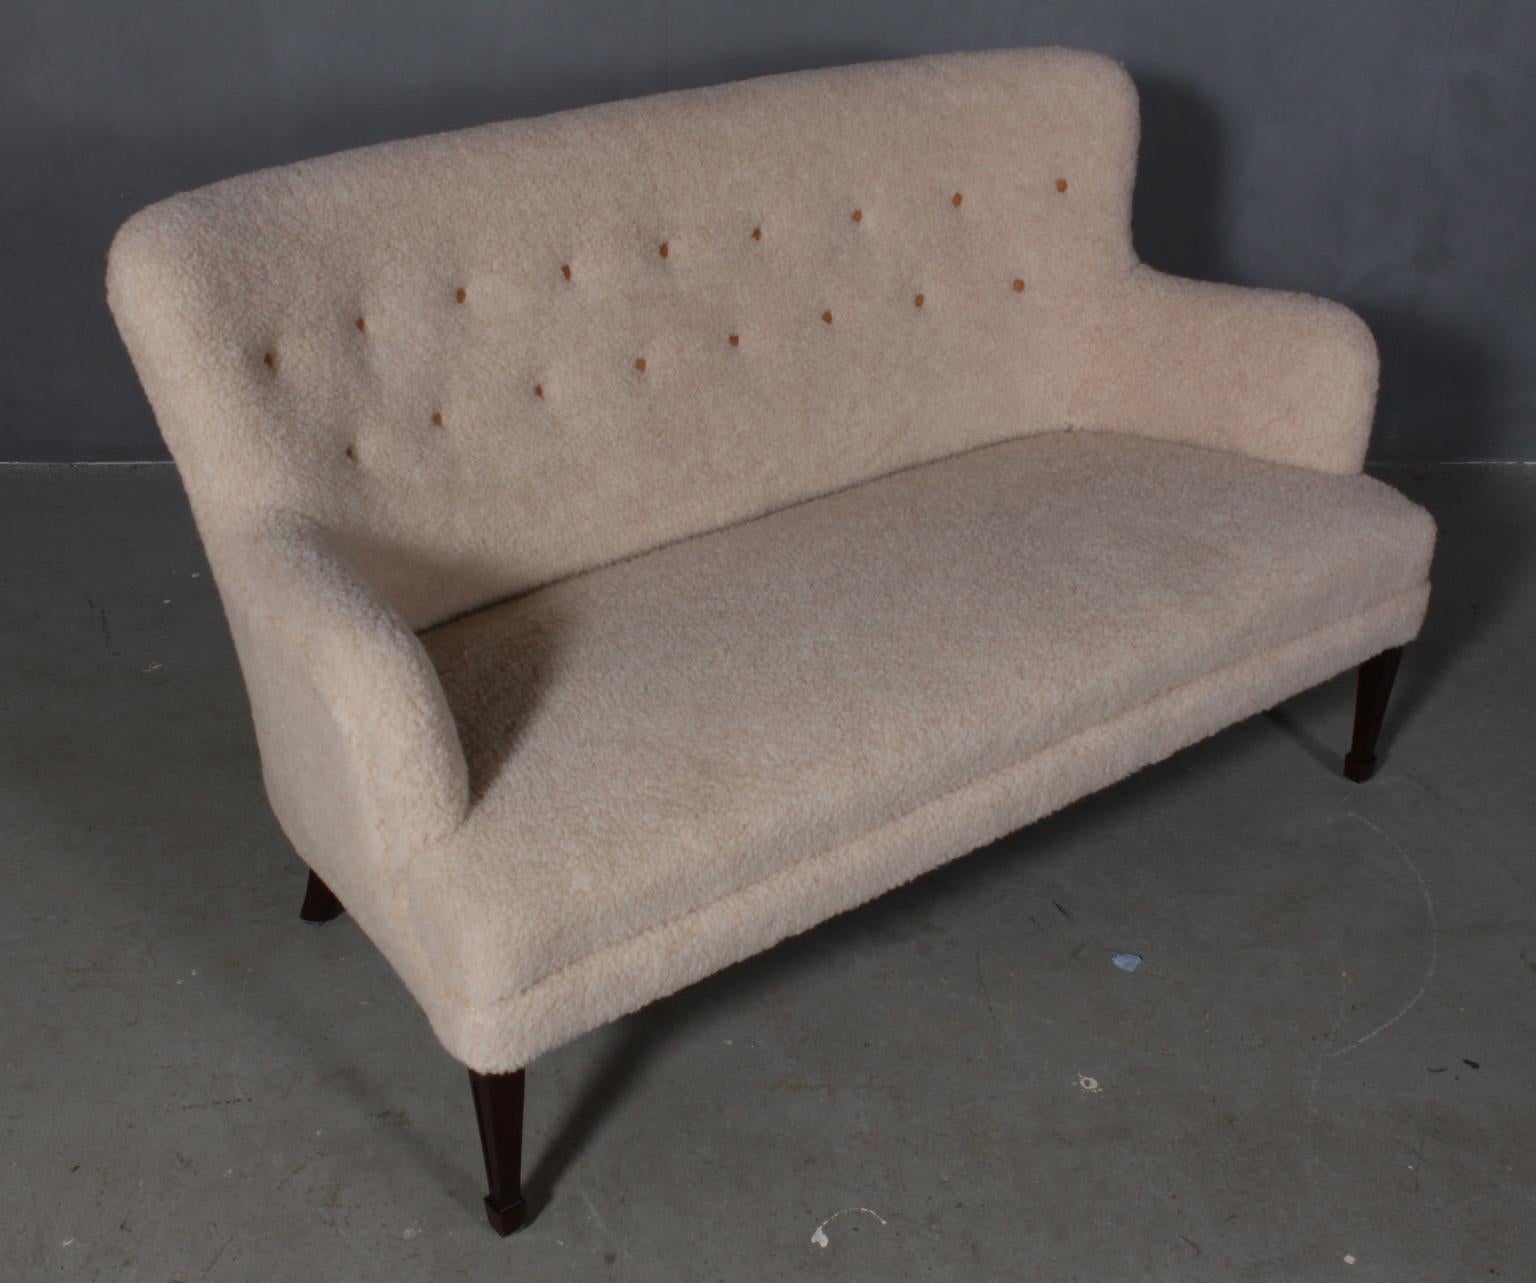 Frits Henningsen. Sofa new upholstered with lambswool, with leather buttons.

Legs of mahogany.

Designed in the 1930s, made by Frits Henningsen.
 